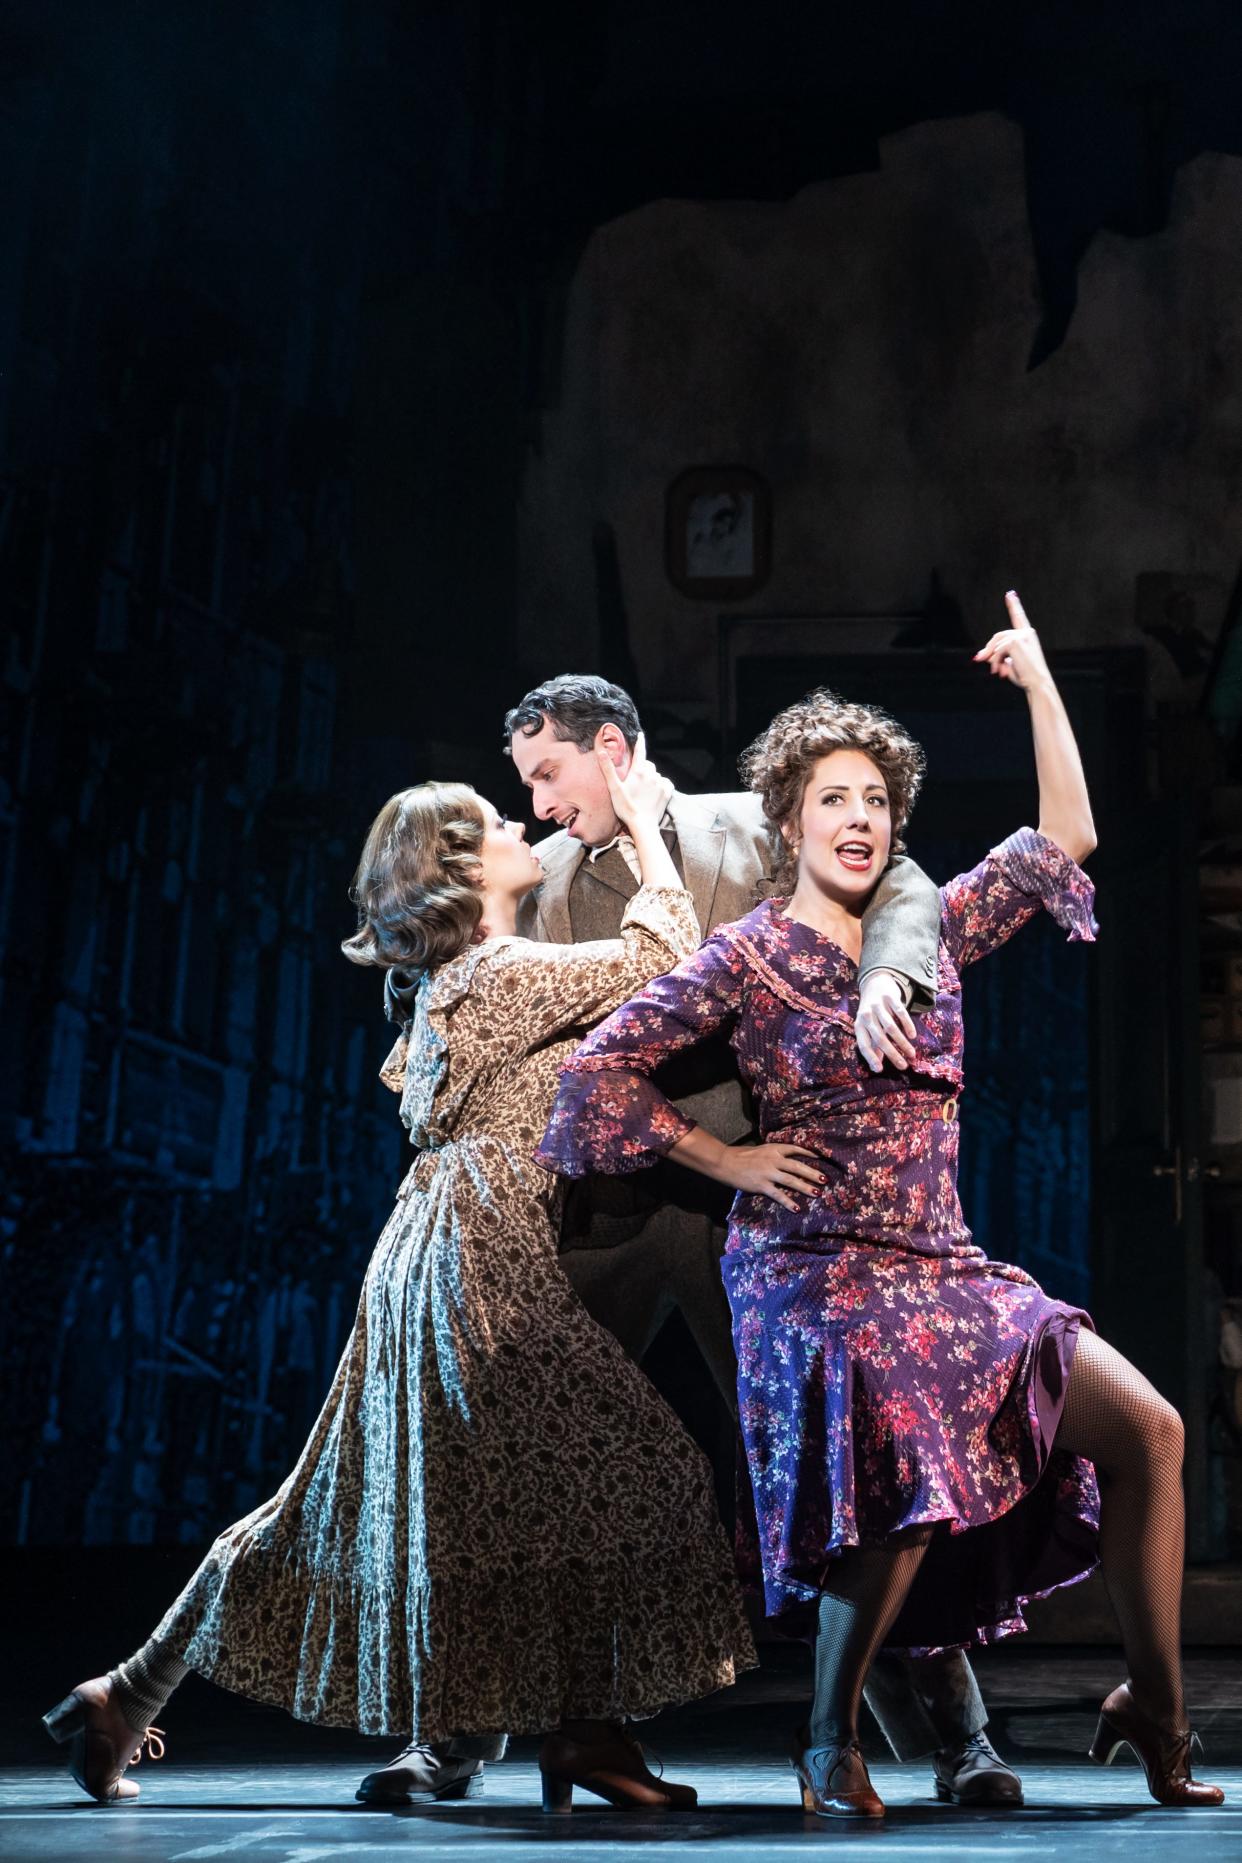 Krista Curry, Nick Bernardi and Stefanie Londino appear in the in the National Tour of, "Annie."